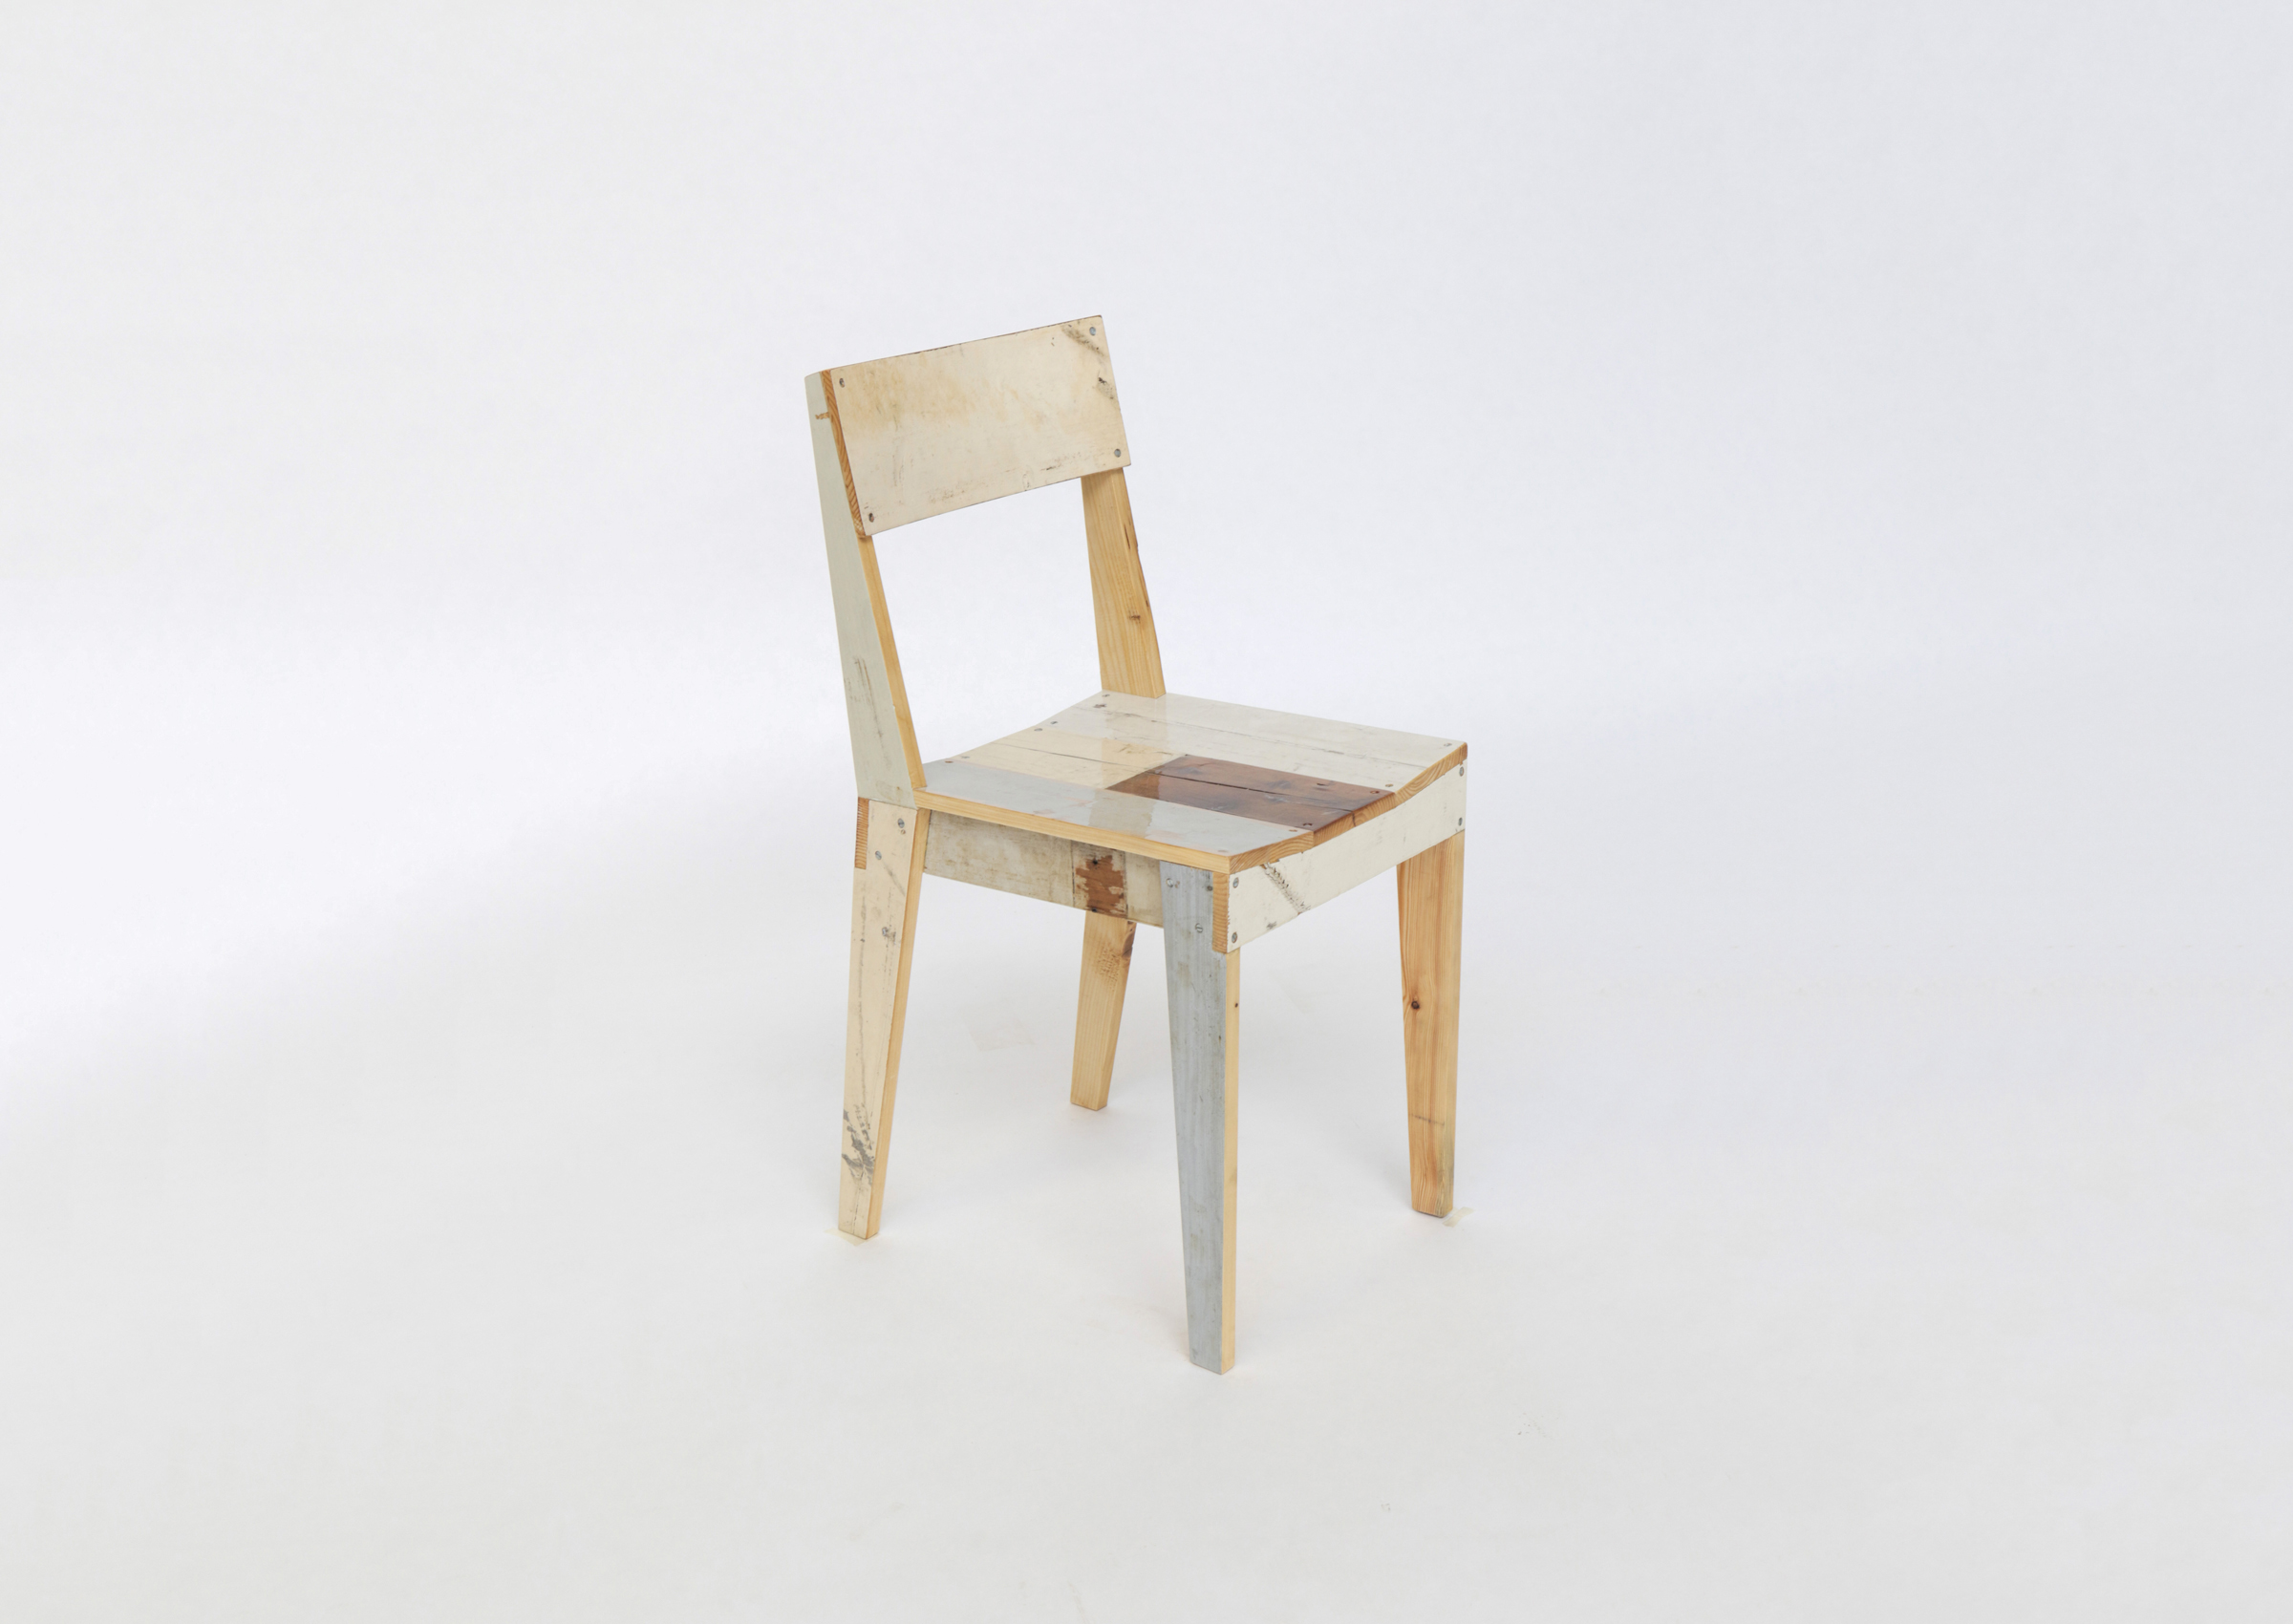 Dining Chair – Scrapwood | Piet Hein Eek | The Future Perfect